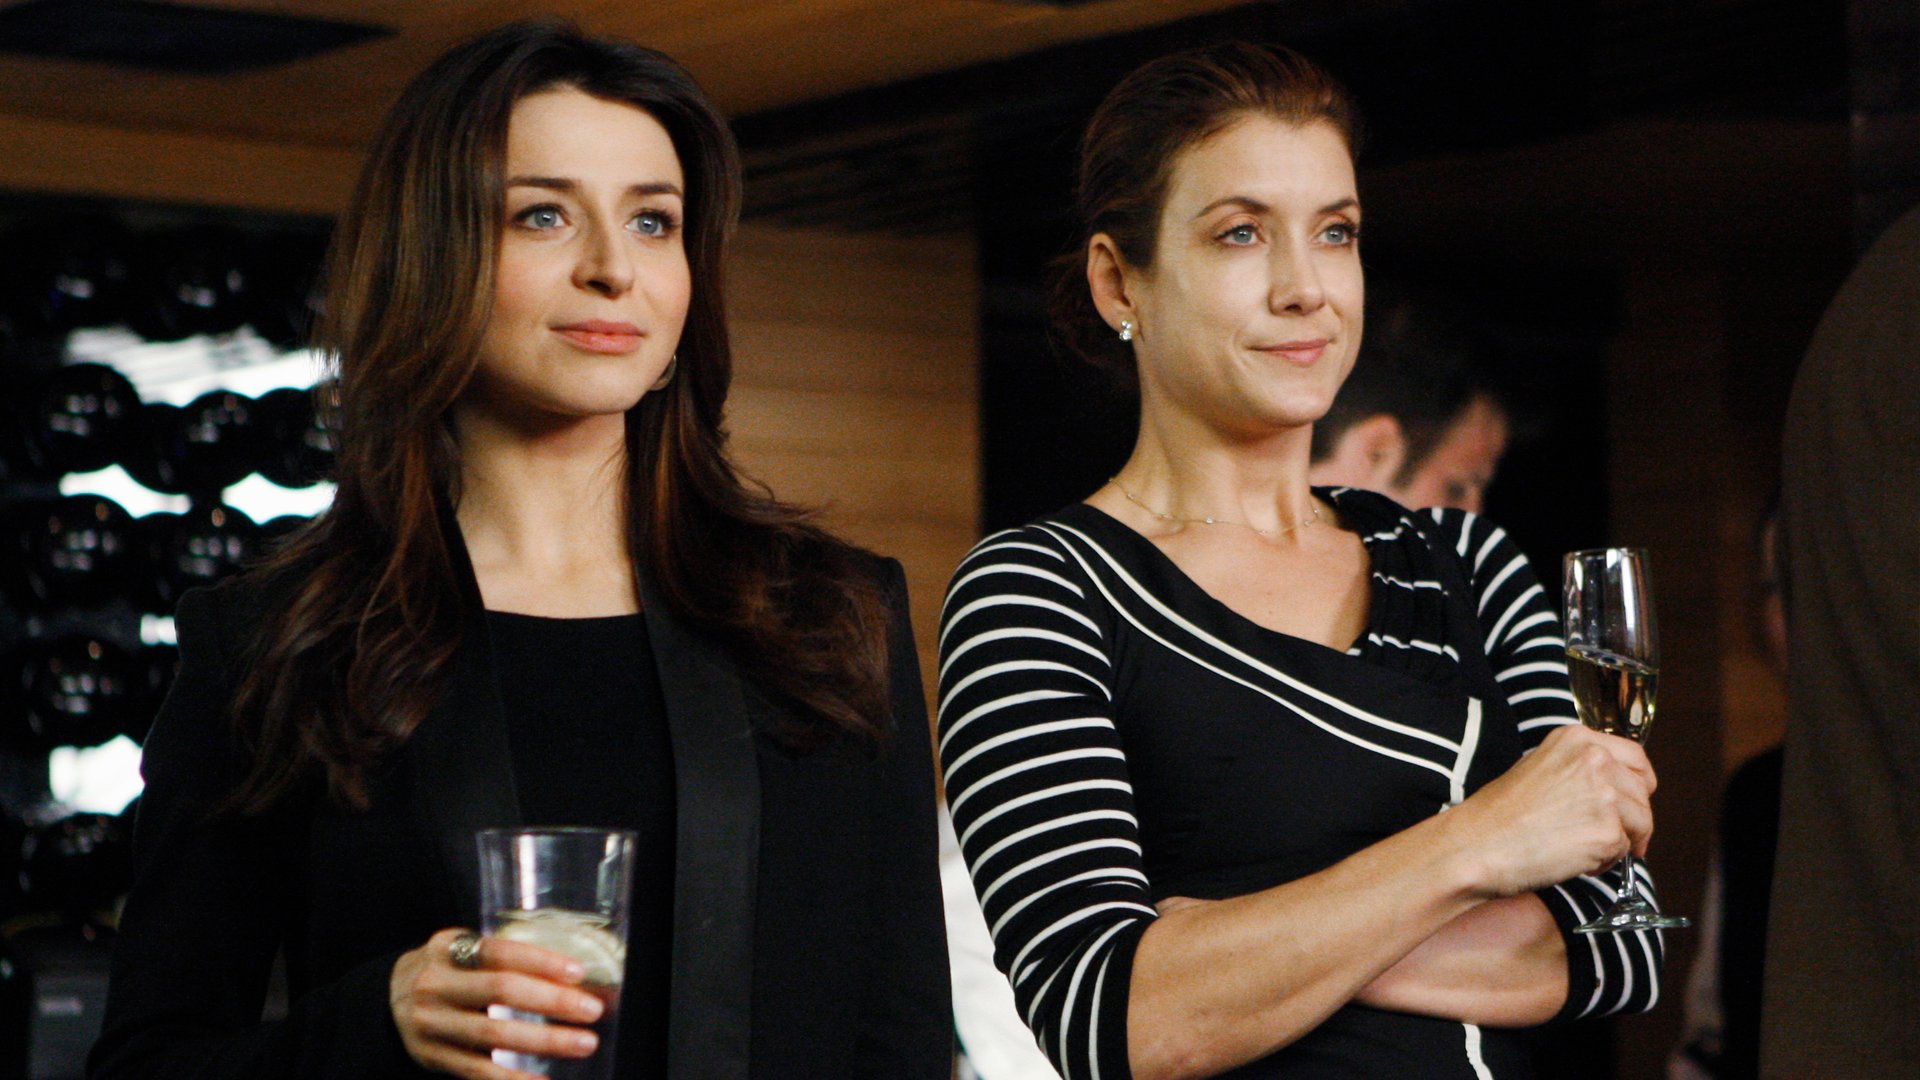 Caterina Scorsone as Amelia Shepherd and Kate Walsh as Addison Montgomery stand together in the ‘Grey’s Anatomy’ spinoff ‘Private Practice’